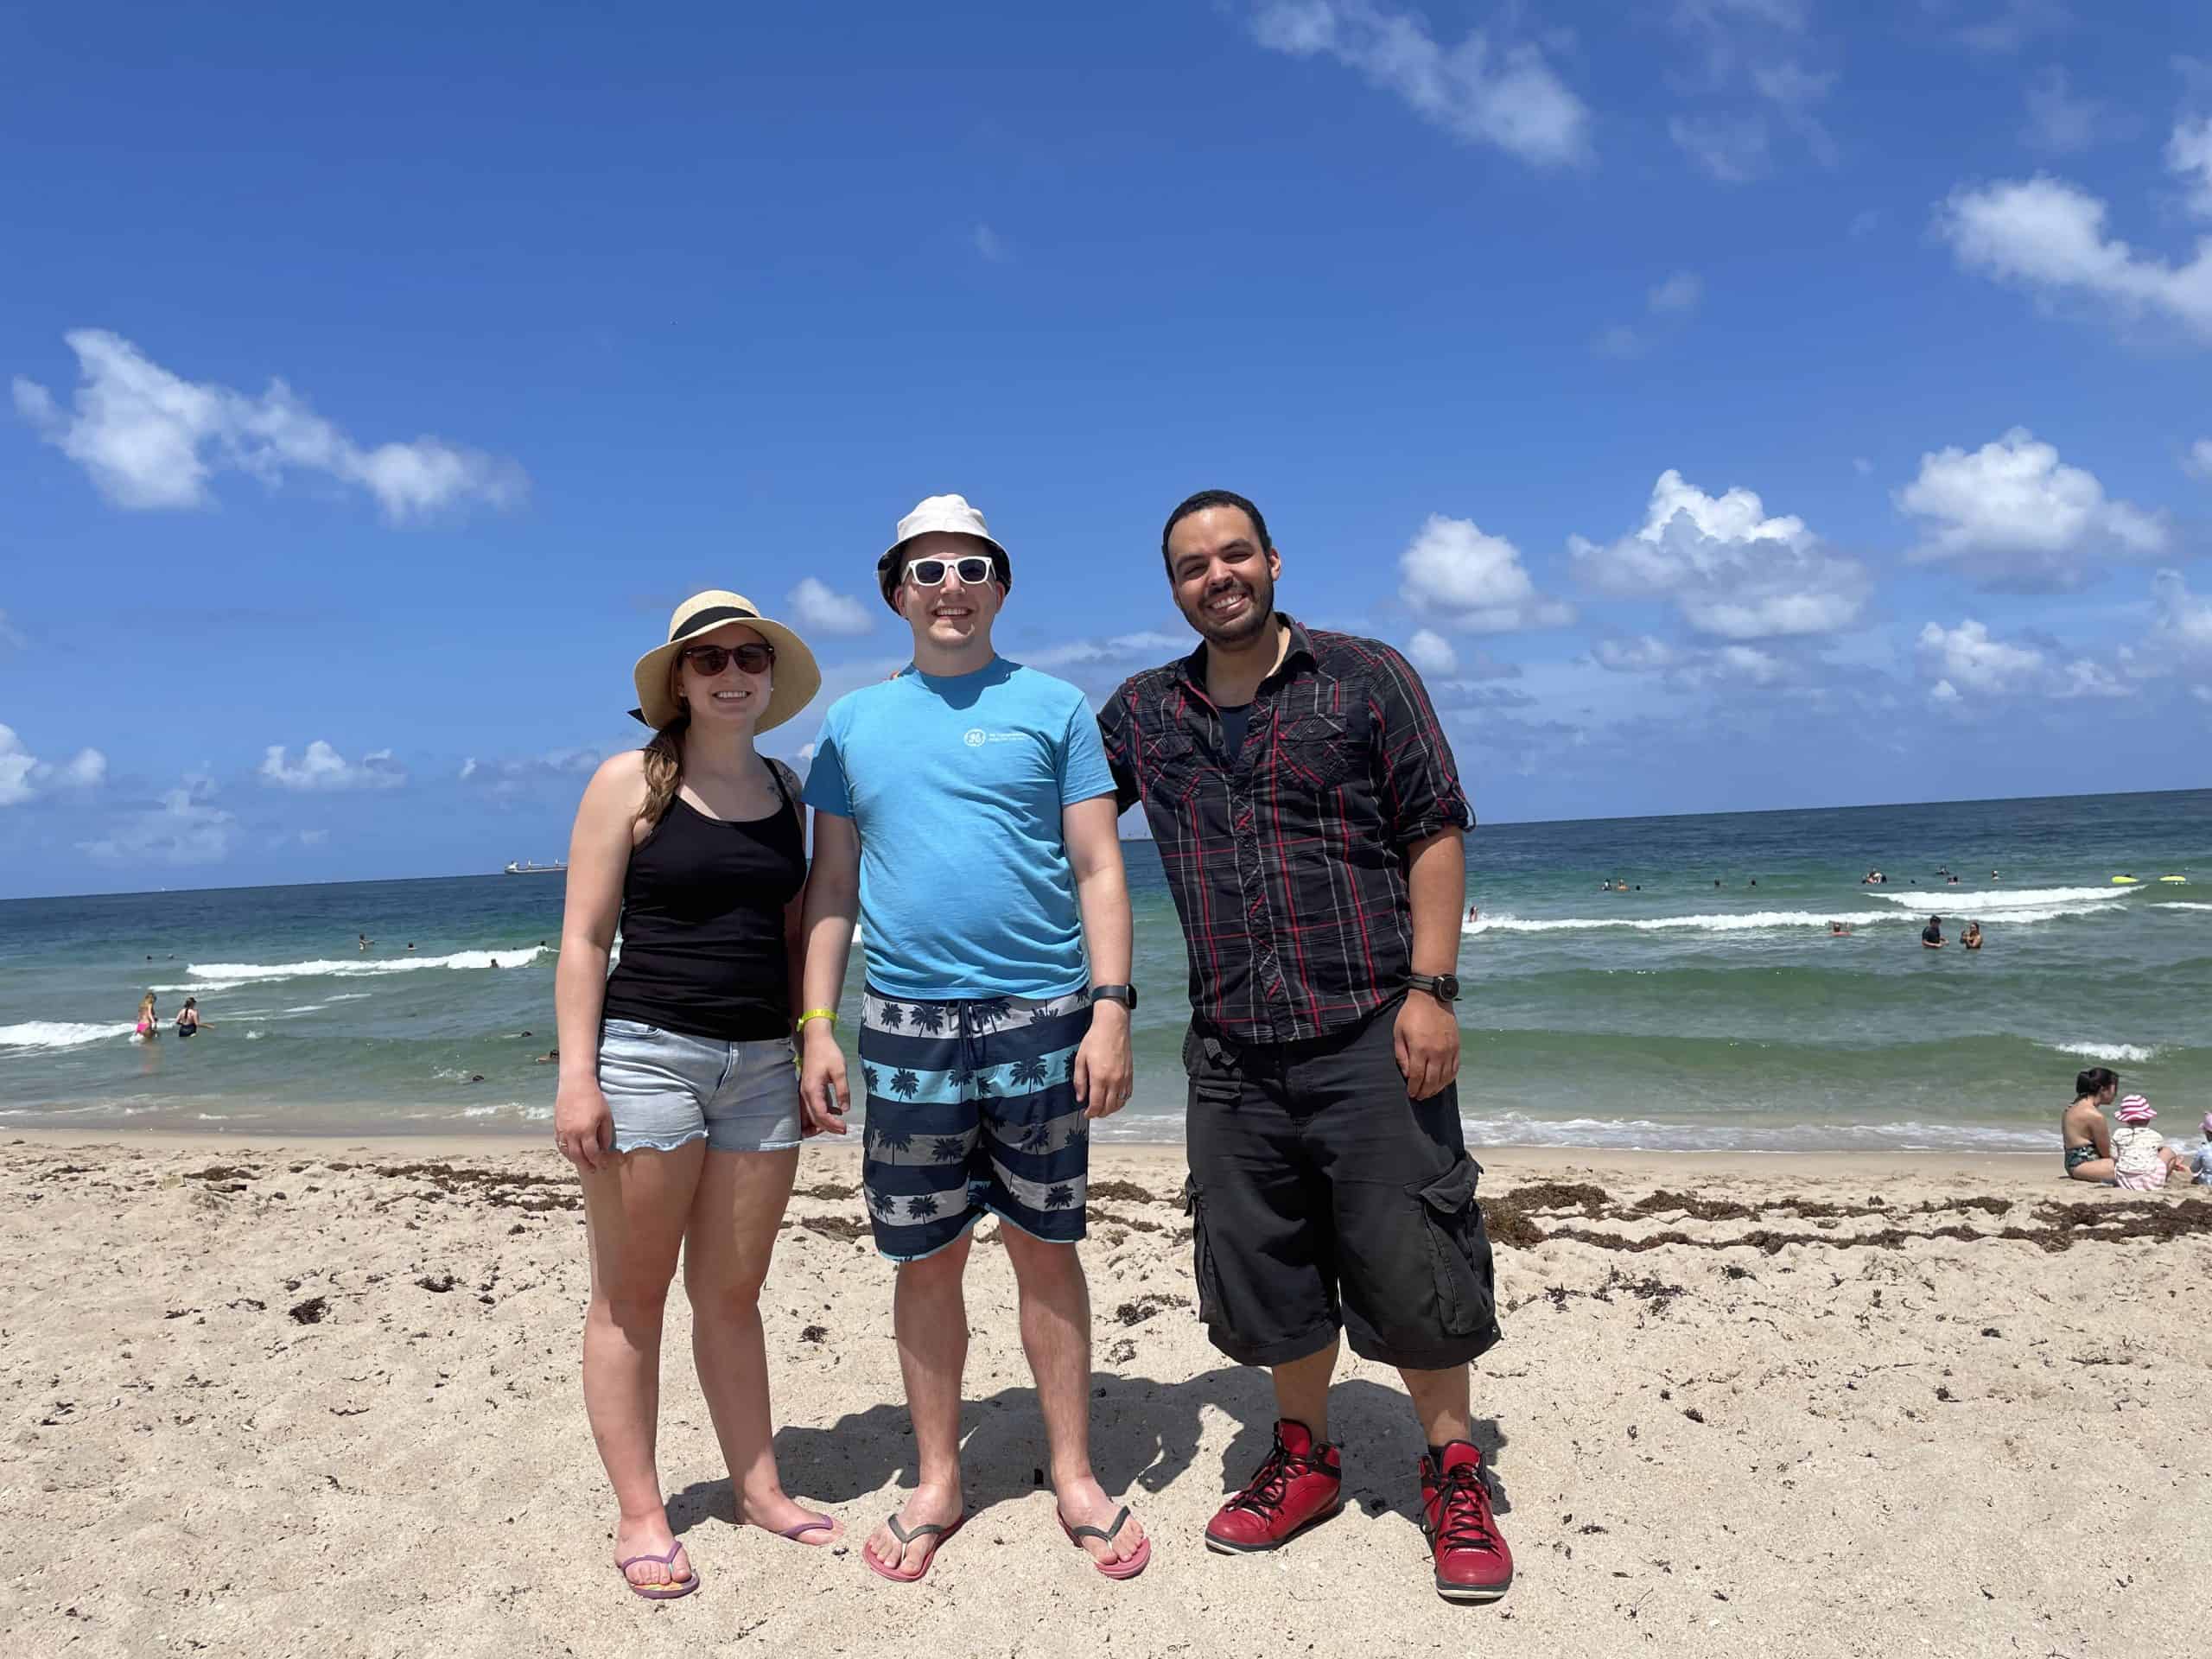 Jeremy, Morgan, and Robert in Ft. Lauderdale